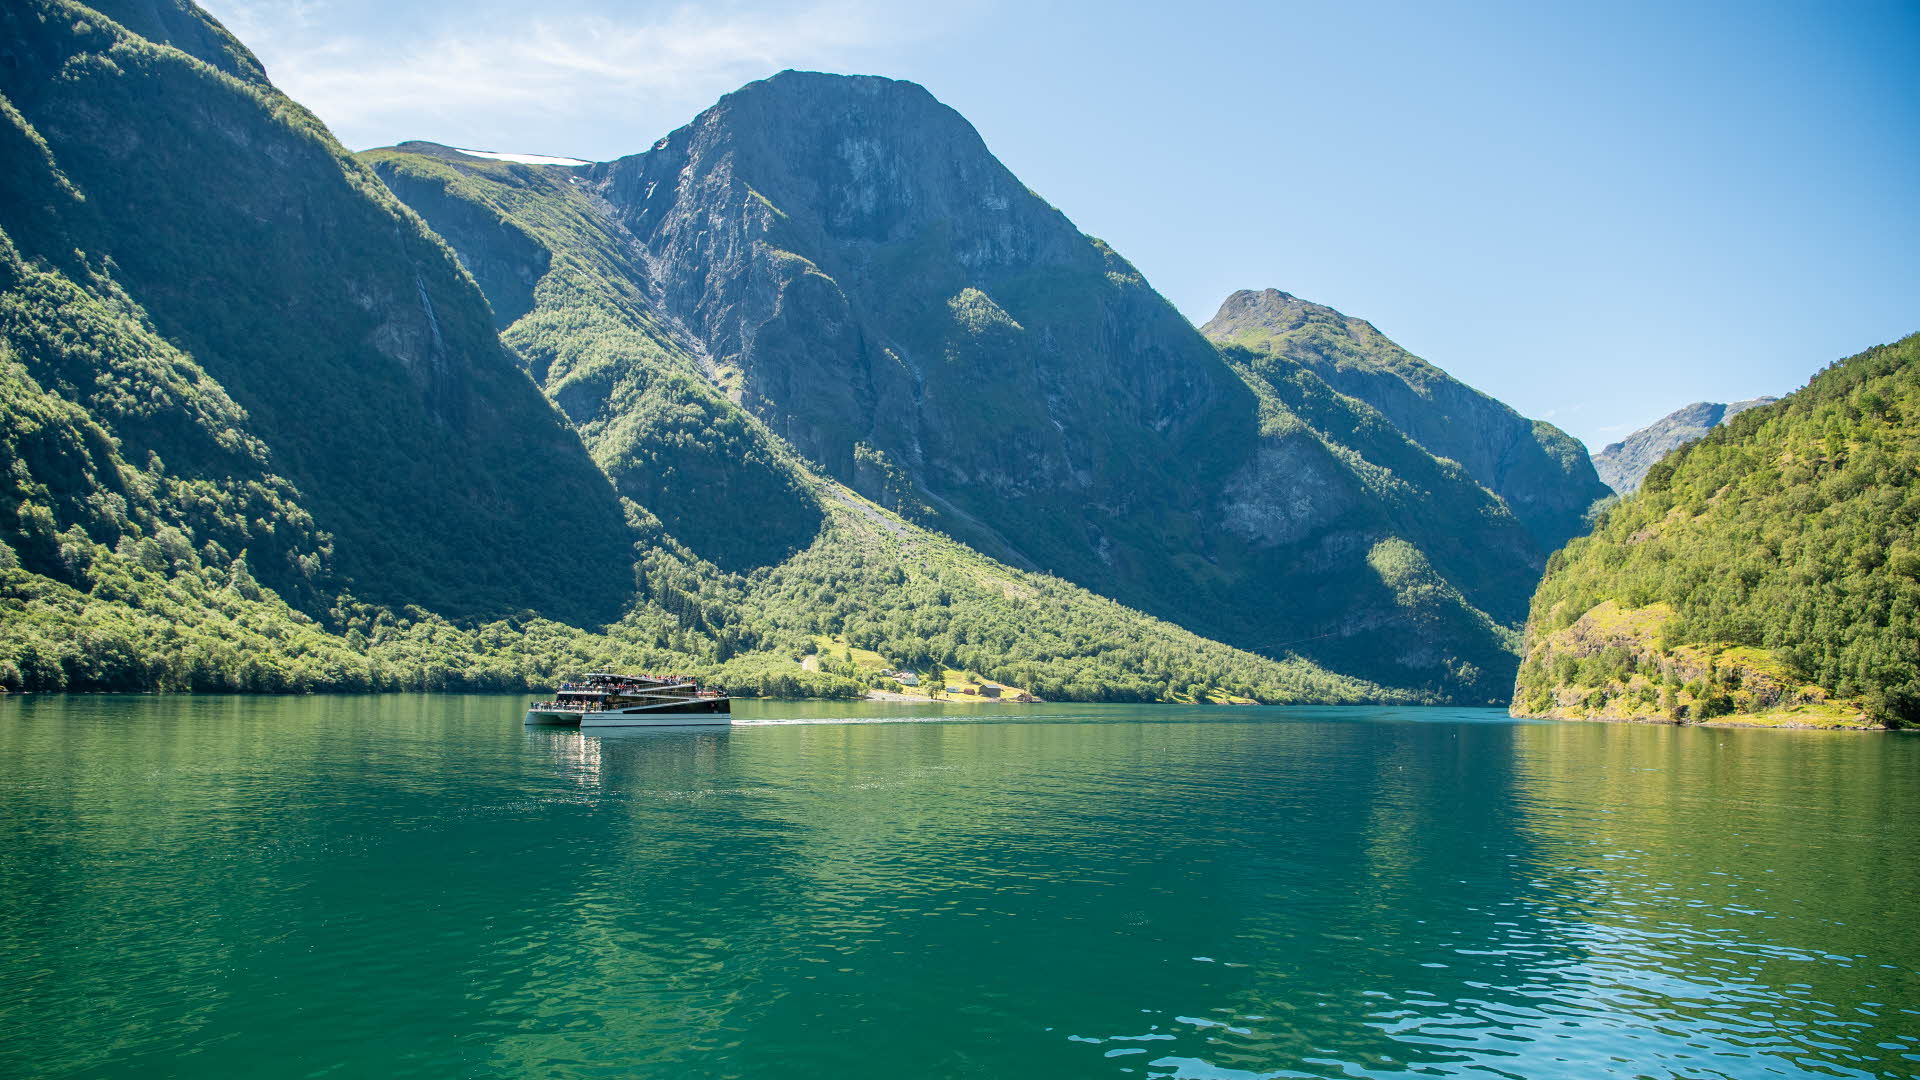 The Future of the Fjords sails in the stillness of the Nærøyfjord on a summer day, surrounded by tall mountains